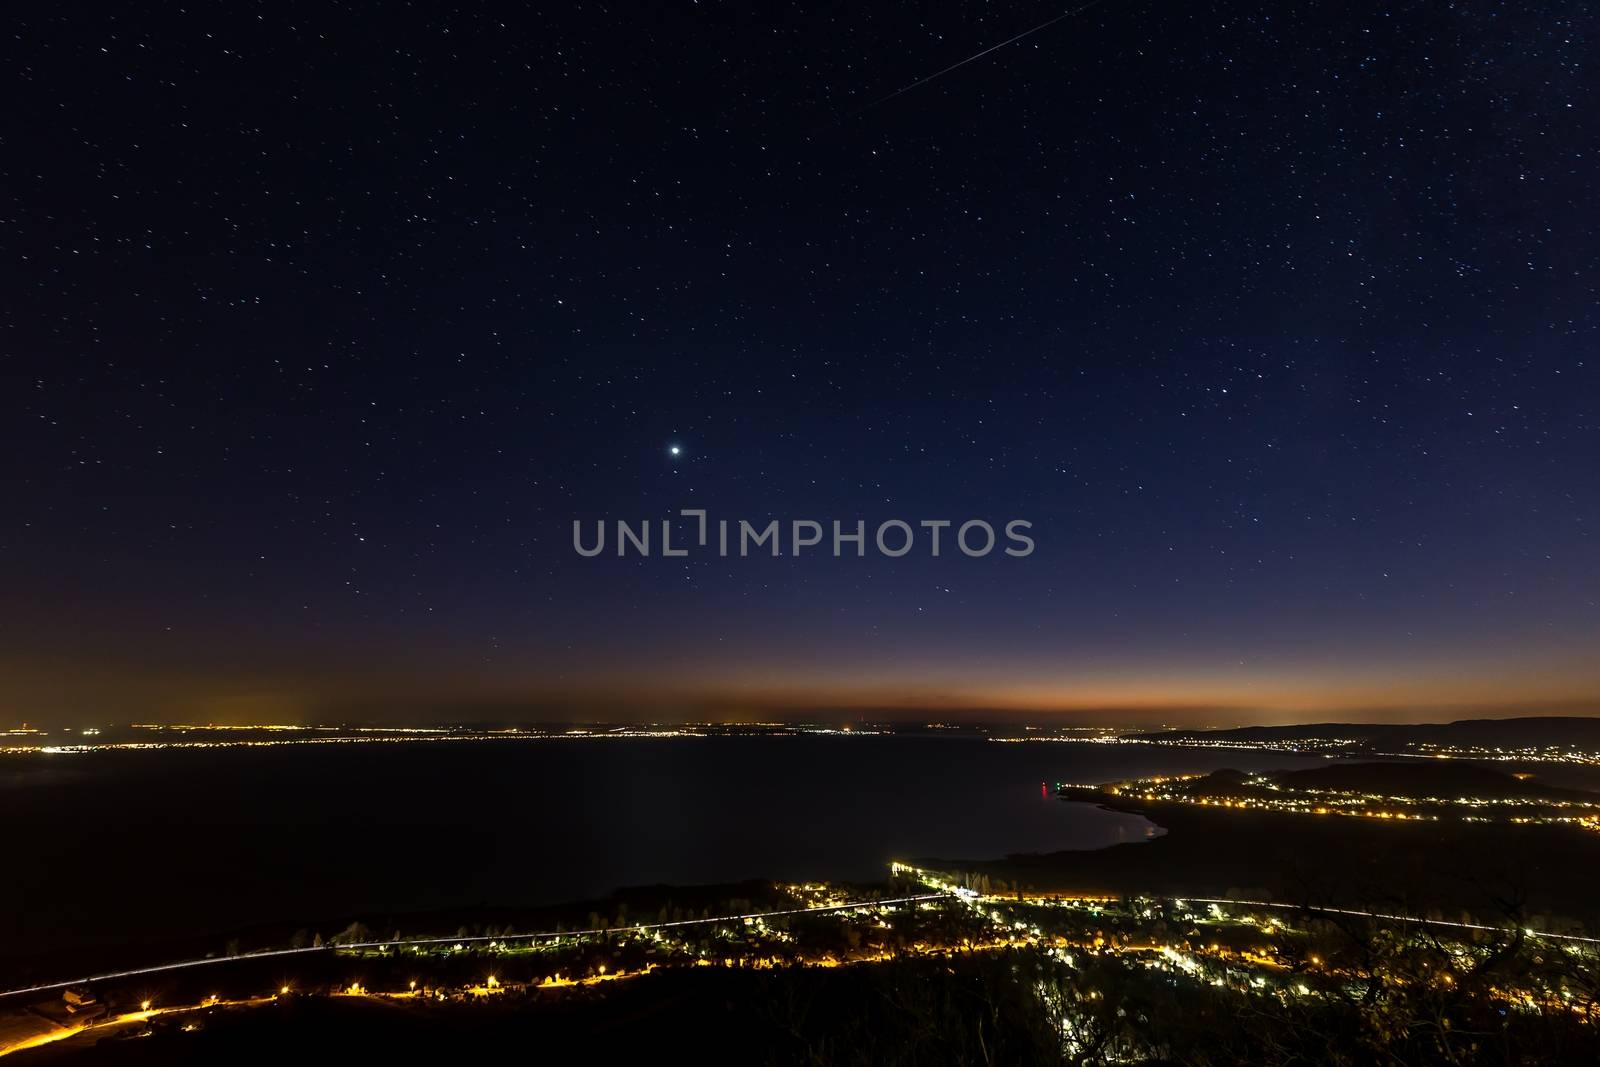 Starry sky at night over the lake Balaton in Hungary by Digoarpi